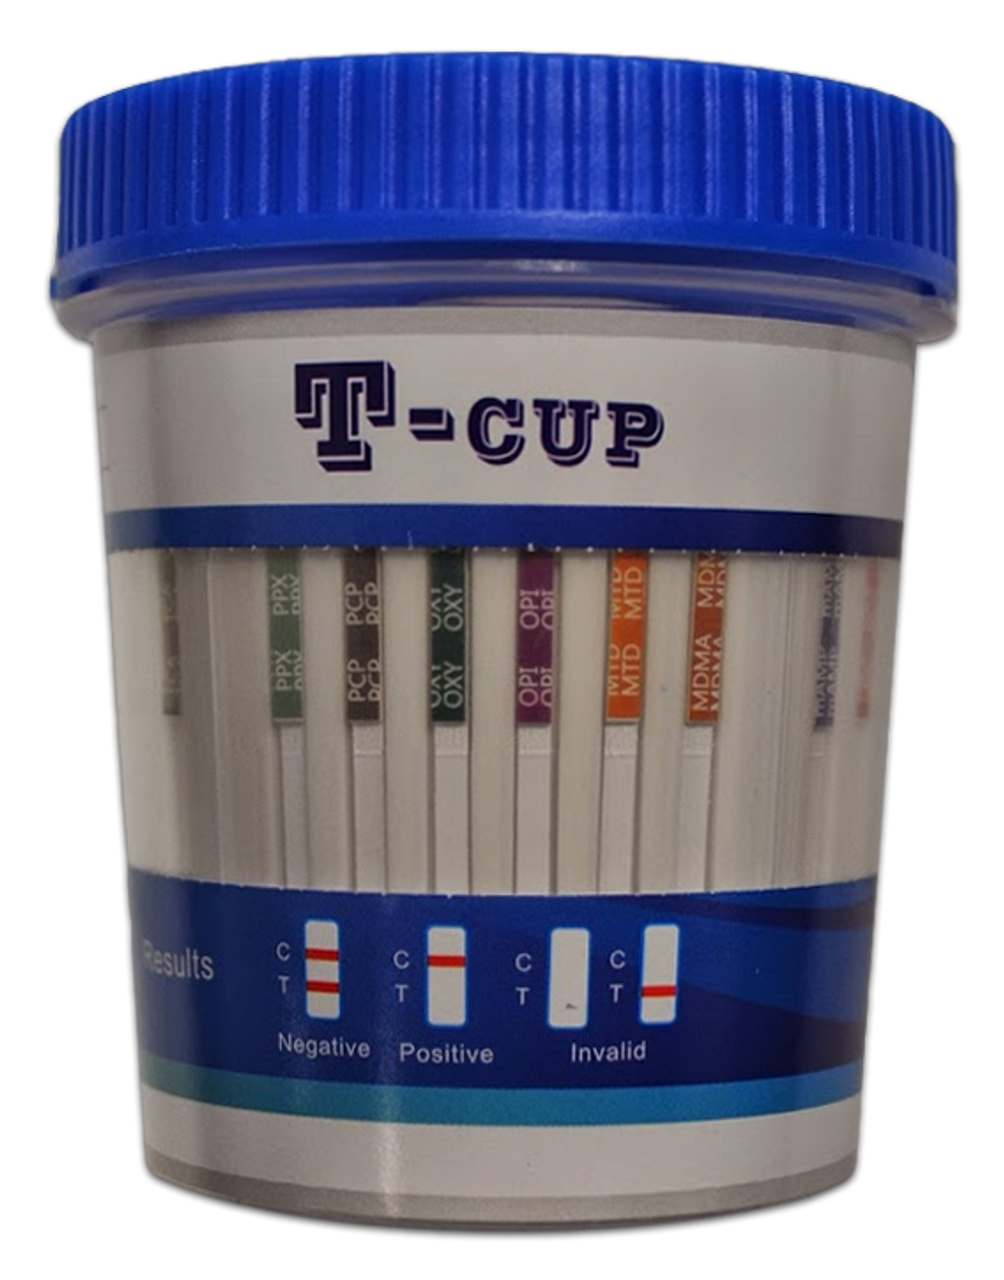 https://cdn11.bigcommerce.com/s-55cc1/images/stencil/1280x1280/products/80/313/T-Cup_Drug_Test_Strips__98521.1599315289.png?c=2